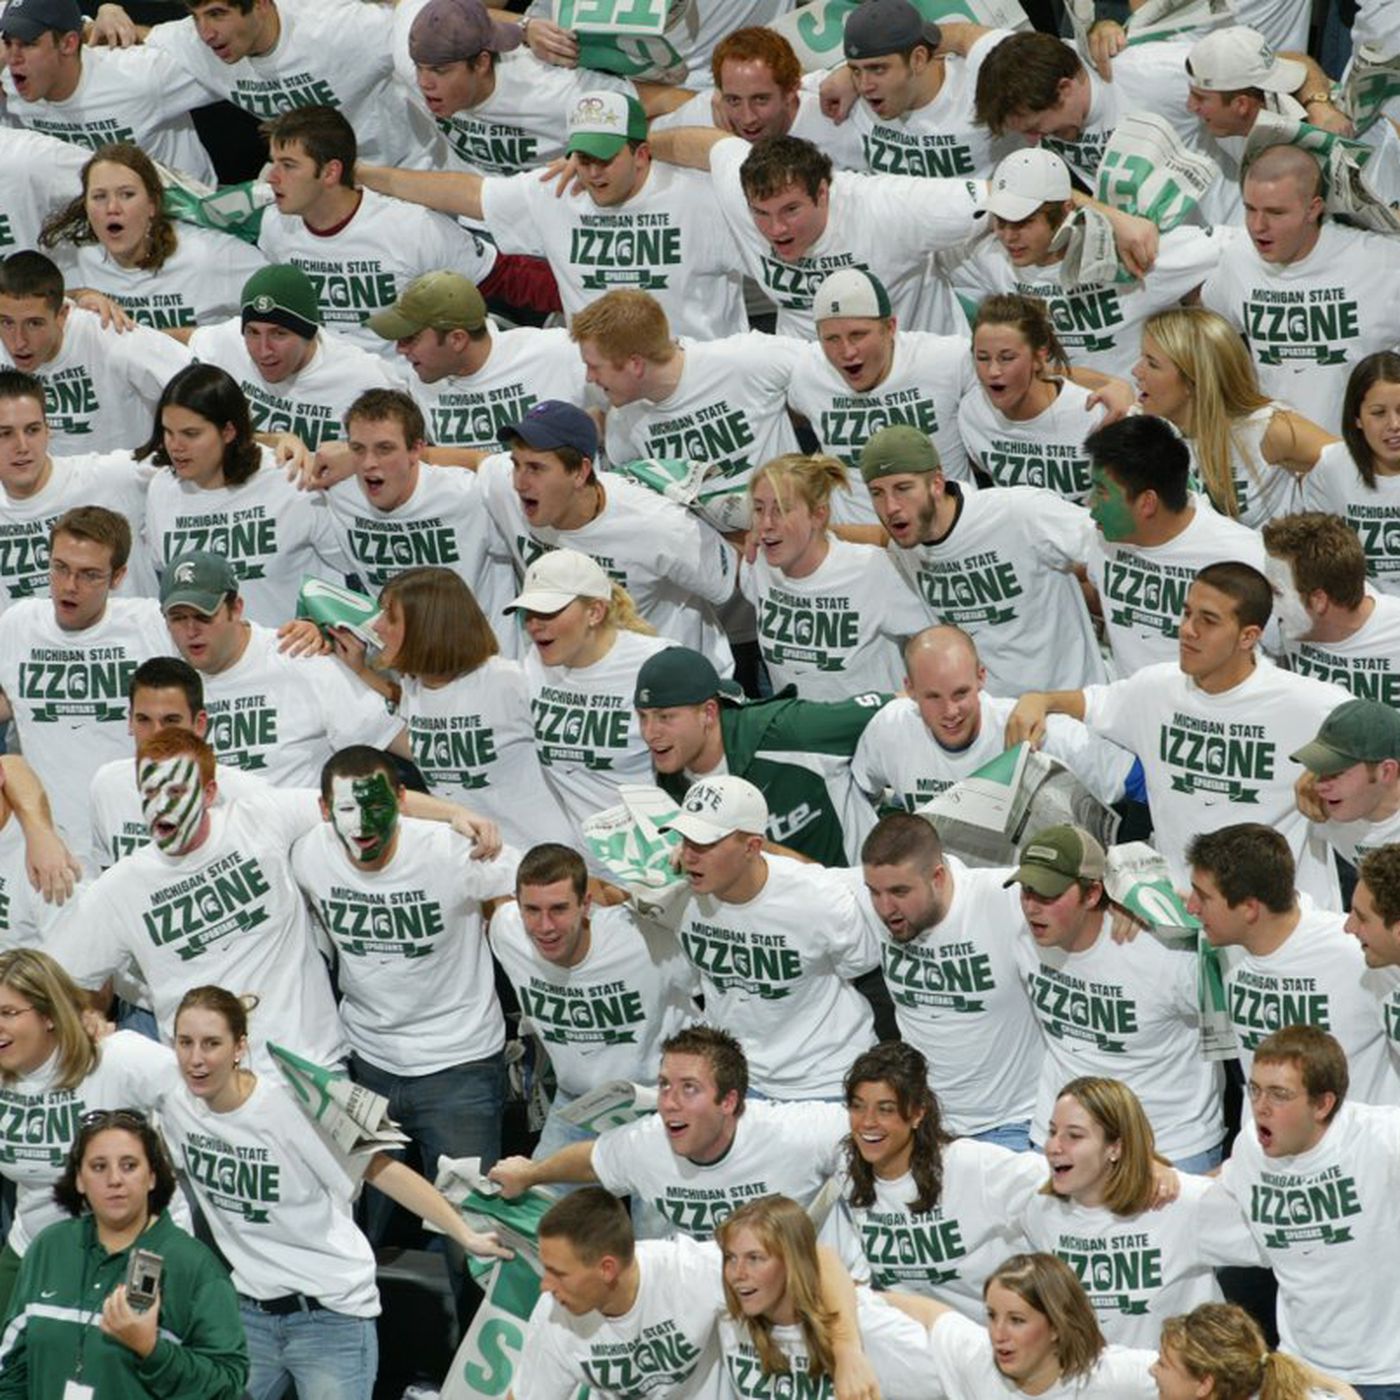 Izzone Plans To Show Support For Larry Nassar Victims The Only